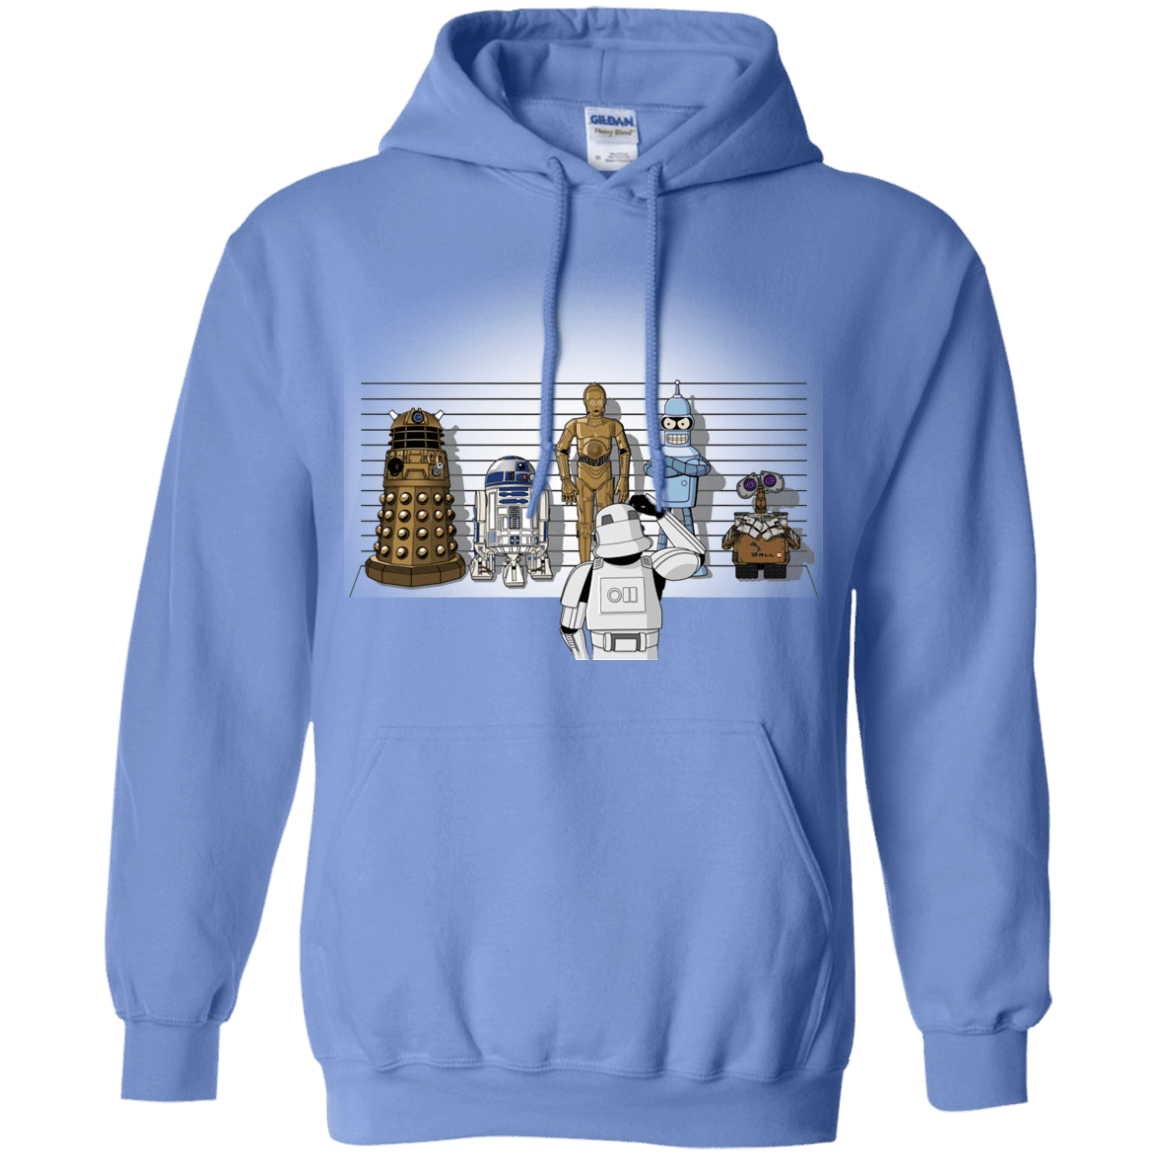 Sweatshirts Carolina Blue / Small Are These Droids Pullover Hoodie